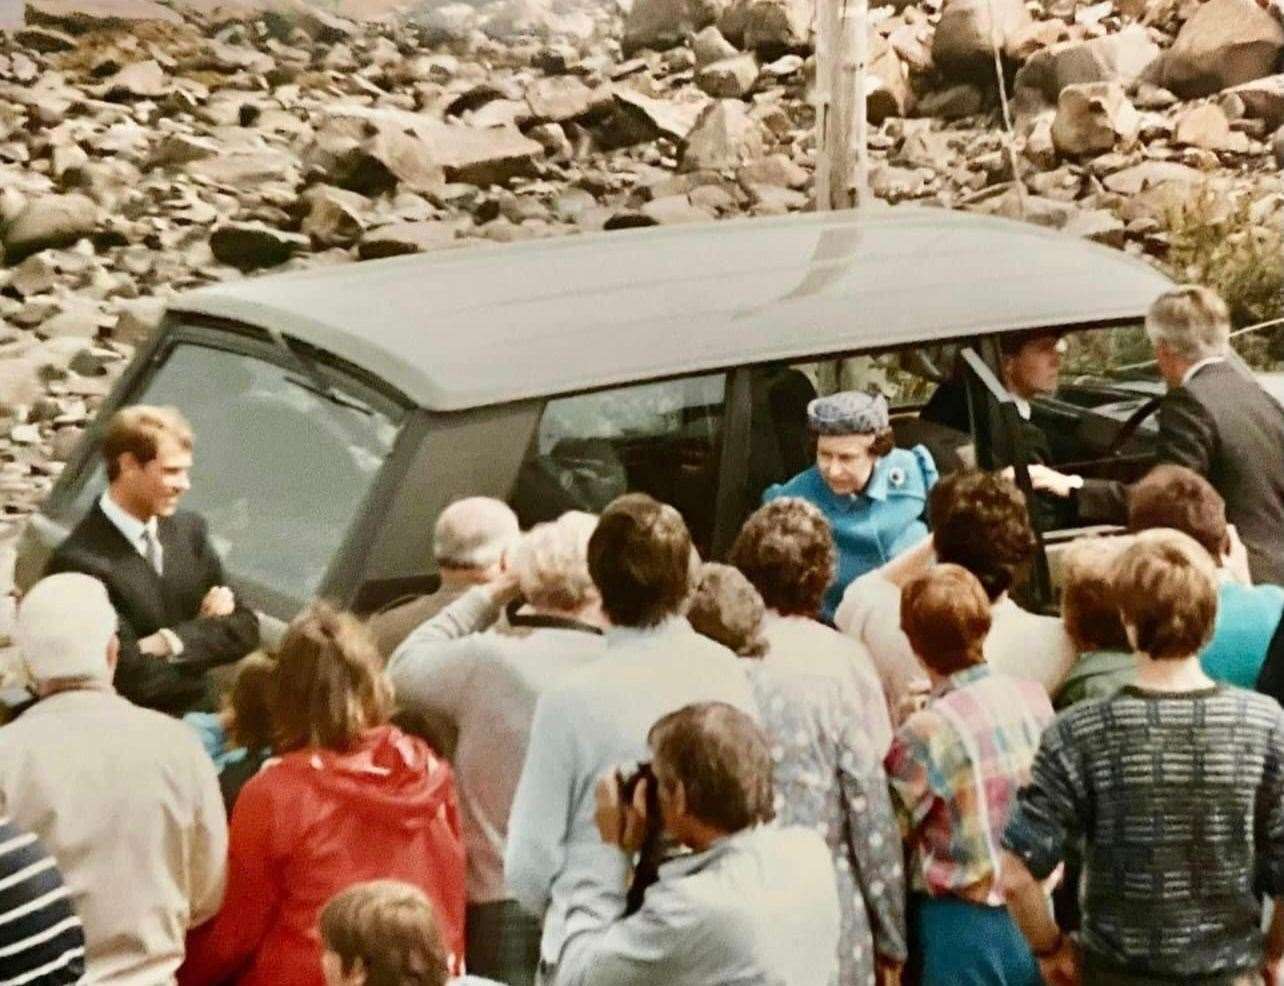 Cllr Macpherson is behind the wheel of the Royal Range Rover, speaking to the Queen’s personal bodyguard as she exits the vehicle at Kilchoan, Ardnamurchan.